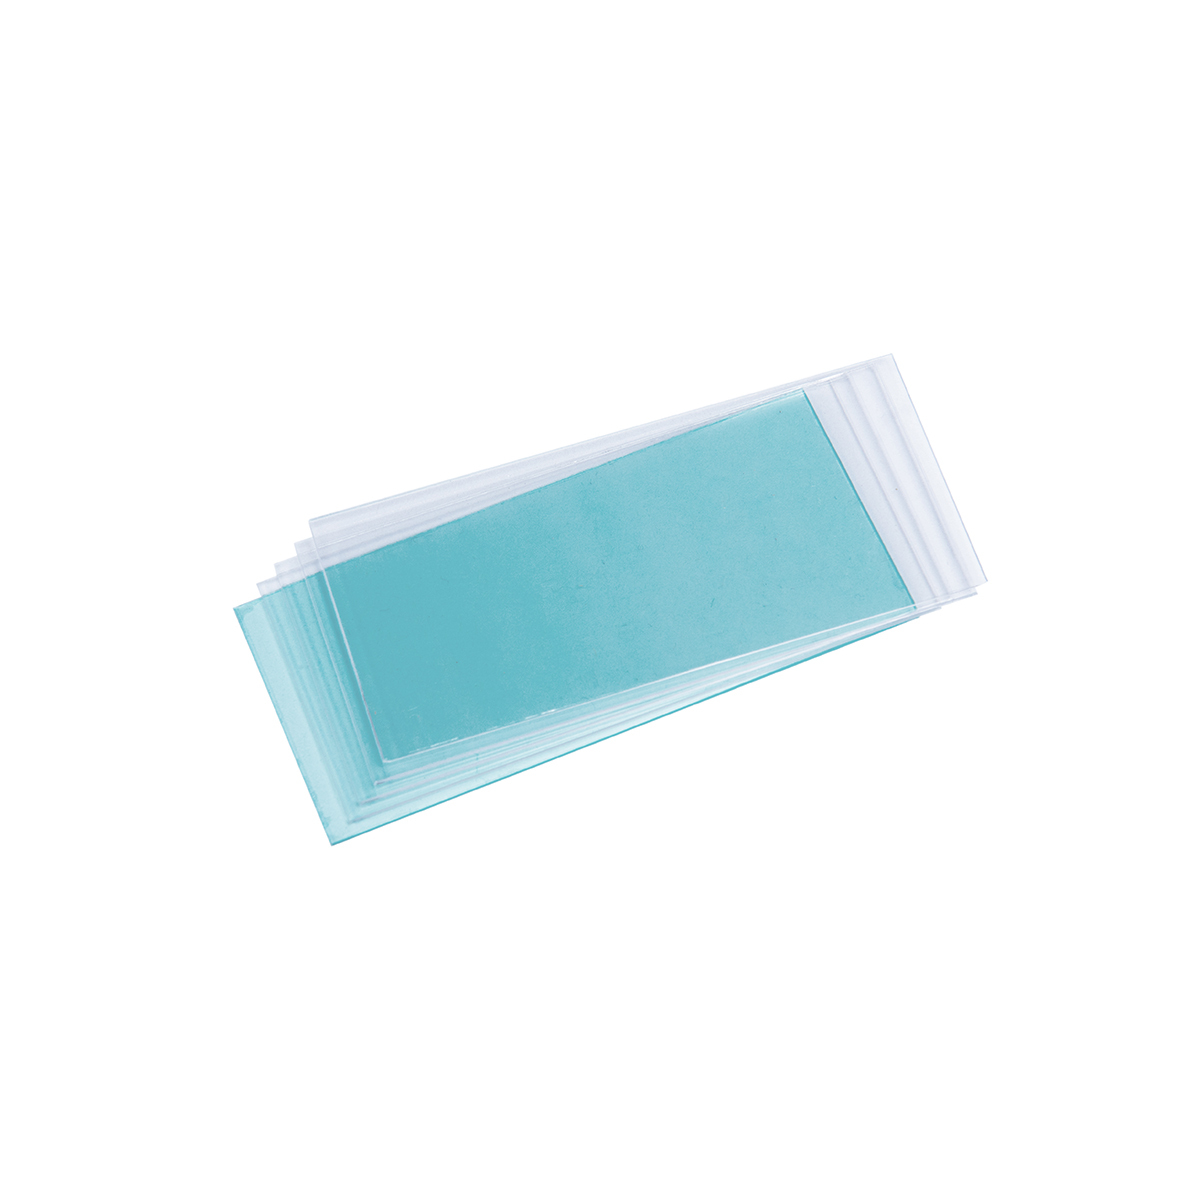 RADNOR® Clear Replacement Polycarbonate Inside Cover Plate (5 Per Package)